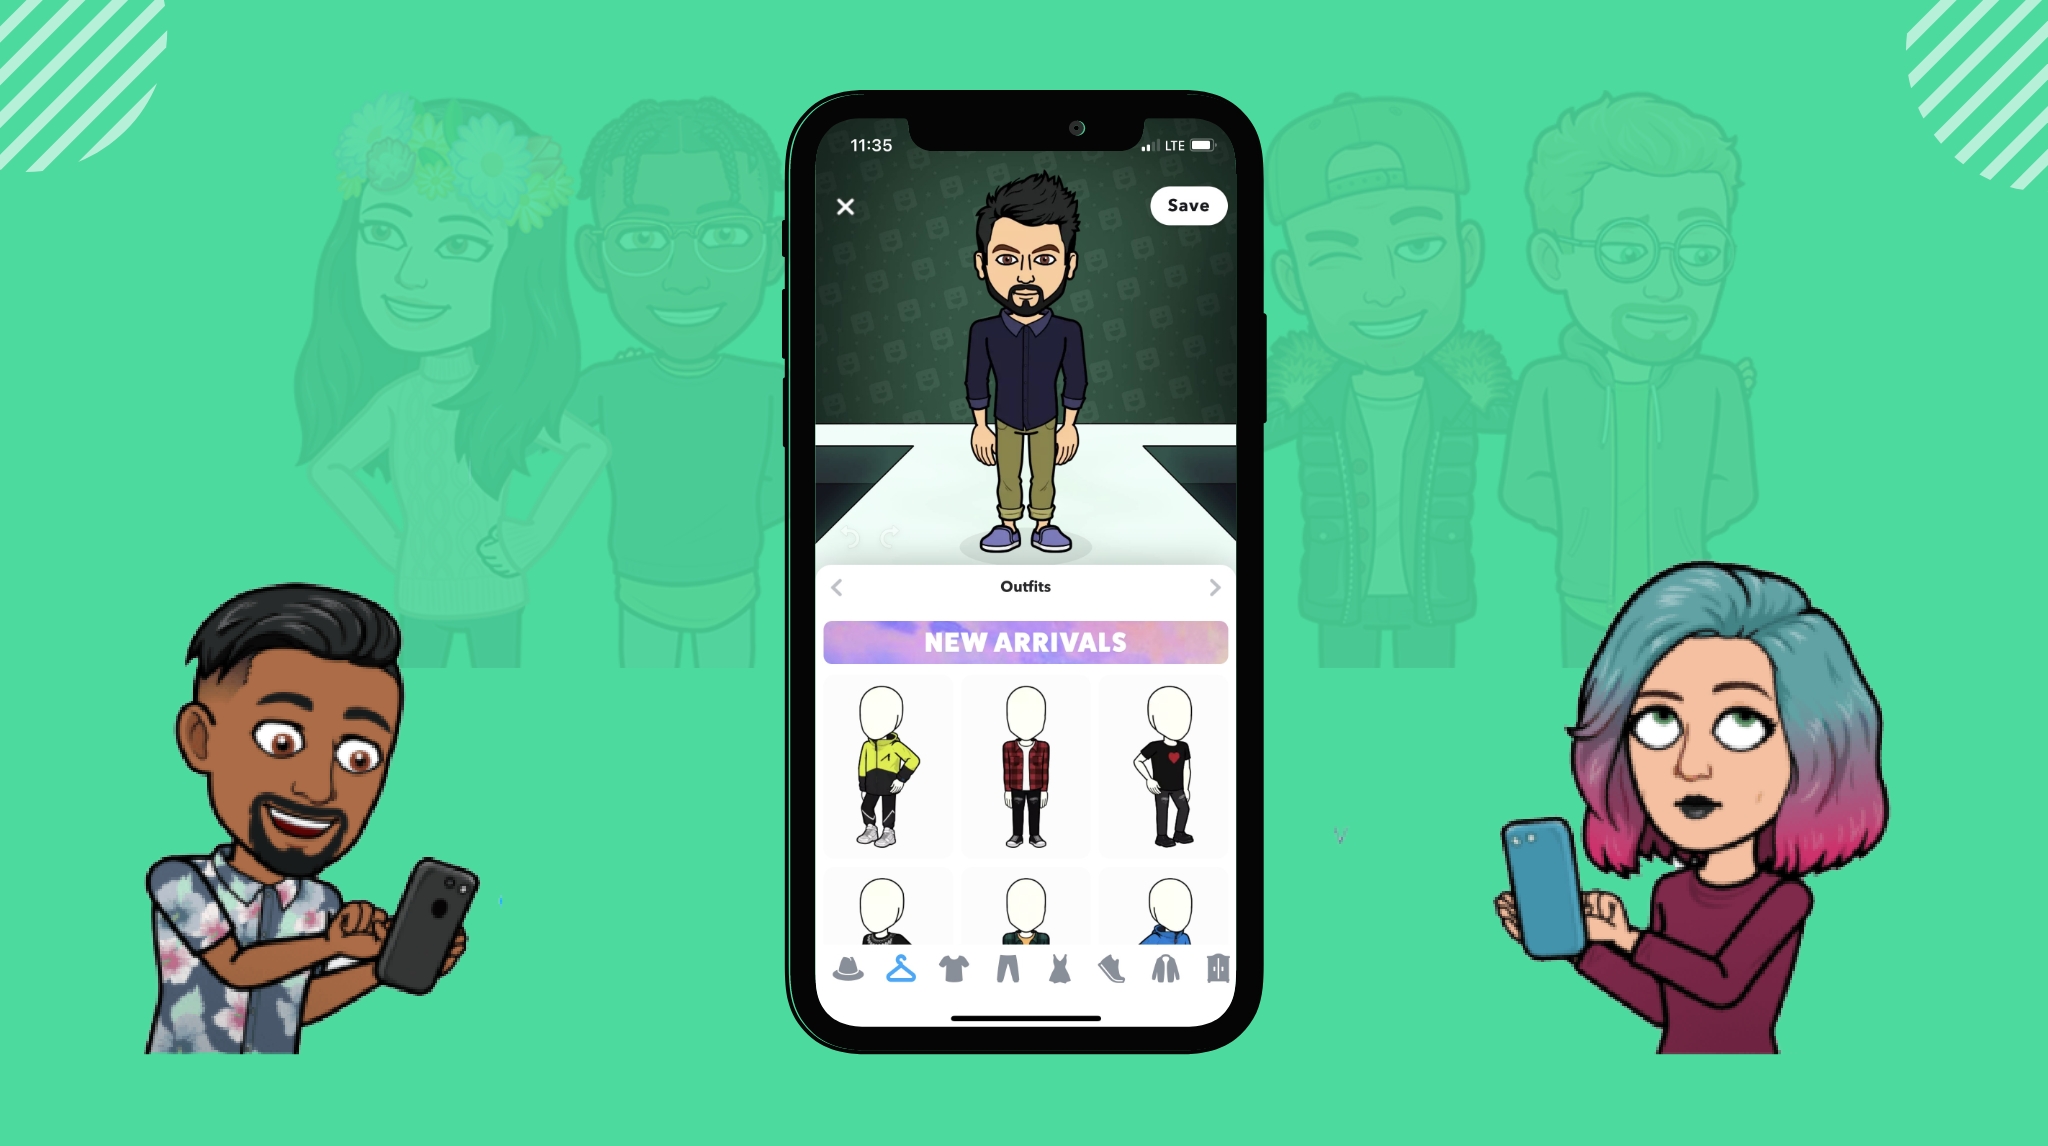 Functionality of Chat Sticker App Like Bitmoji. Know in Details